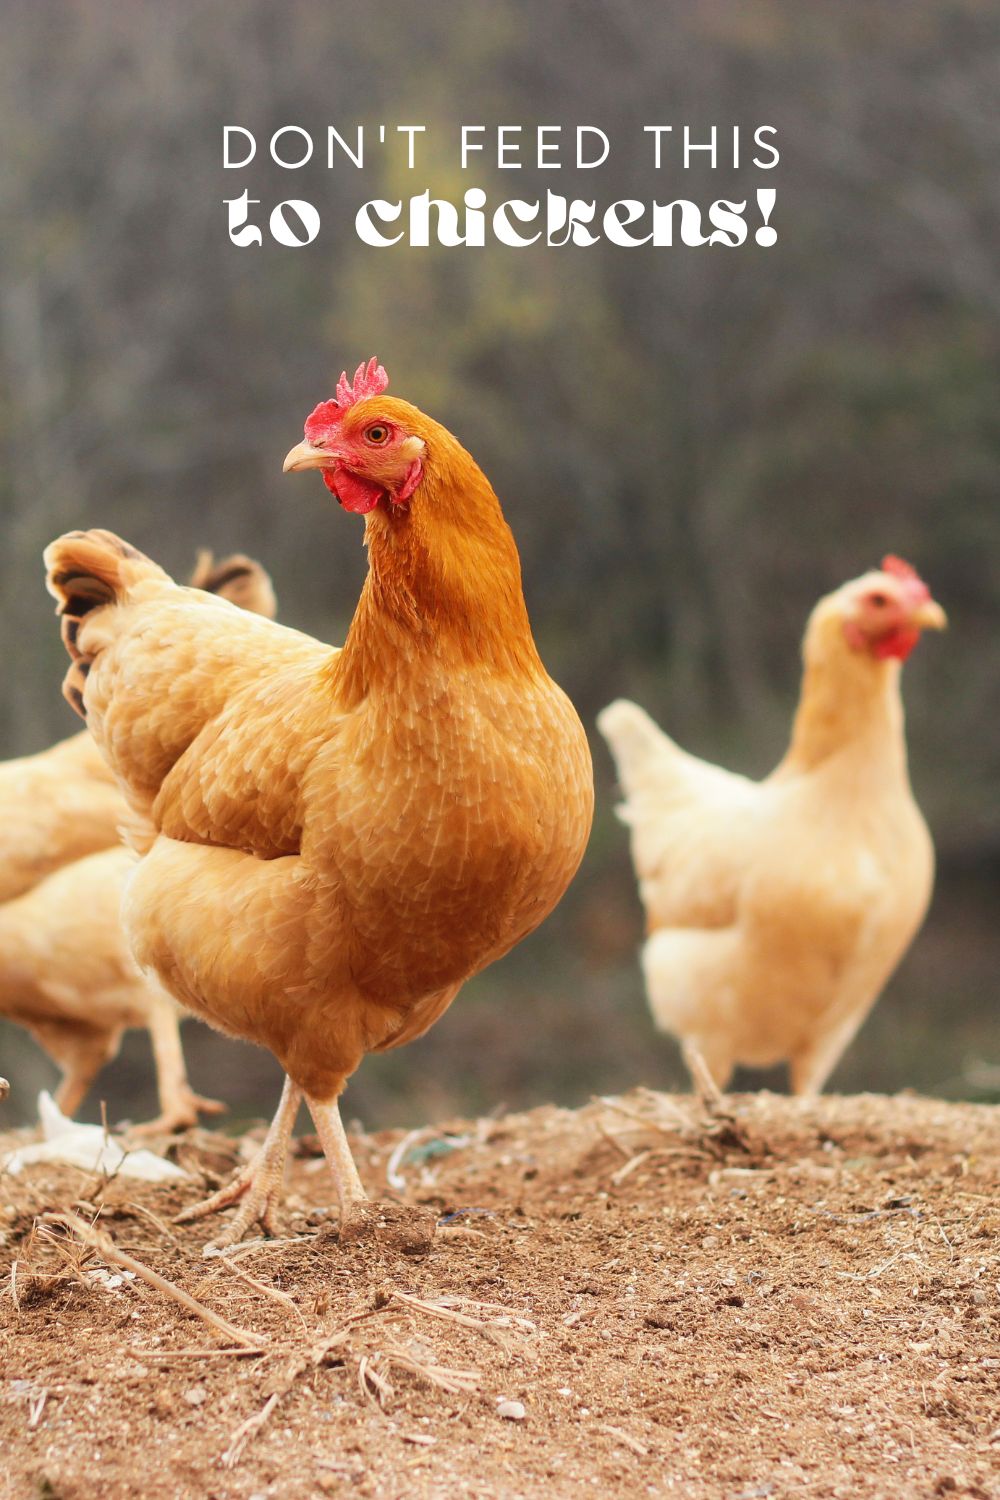 There are several types of food that can be harmful or toxic to chickens. It is important to be aware of these foods and avoid feeding them to your chickens.